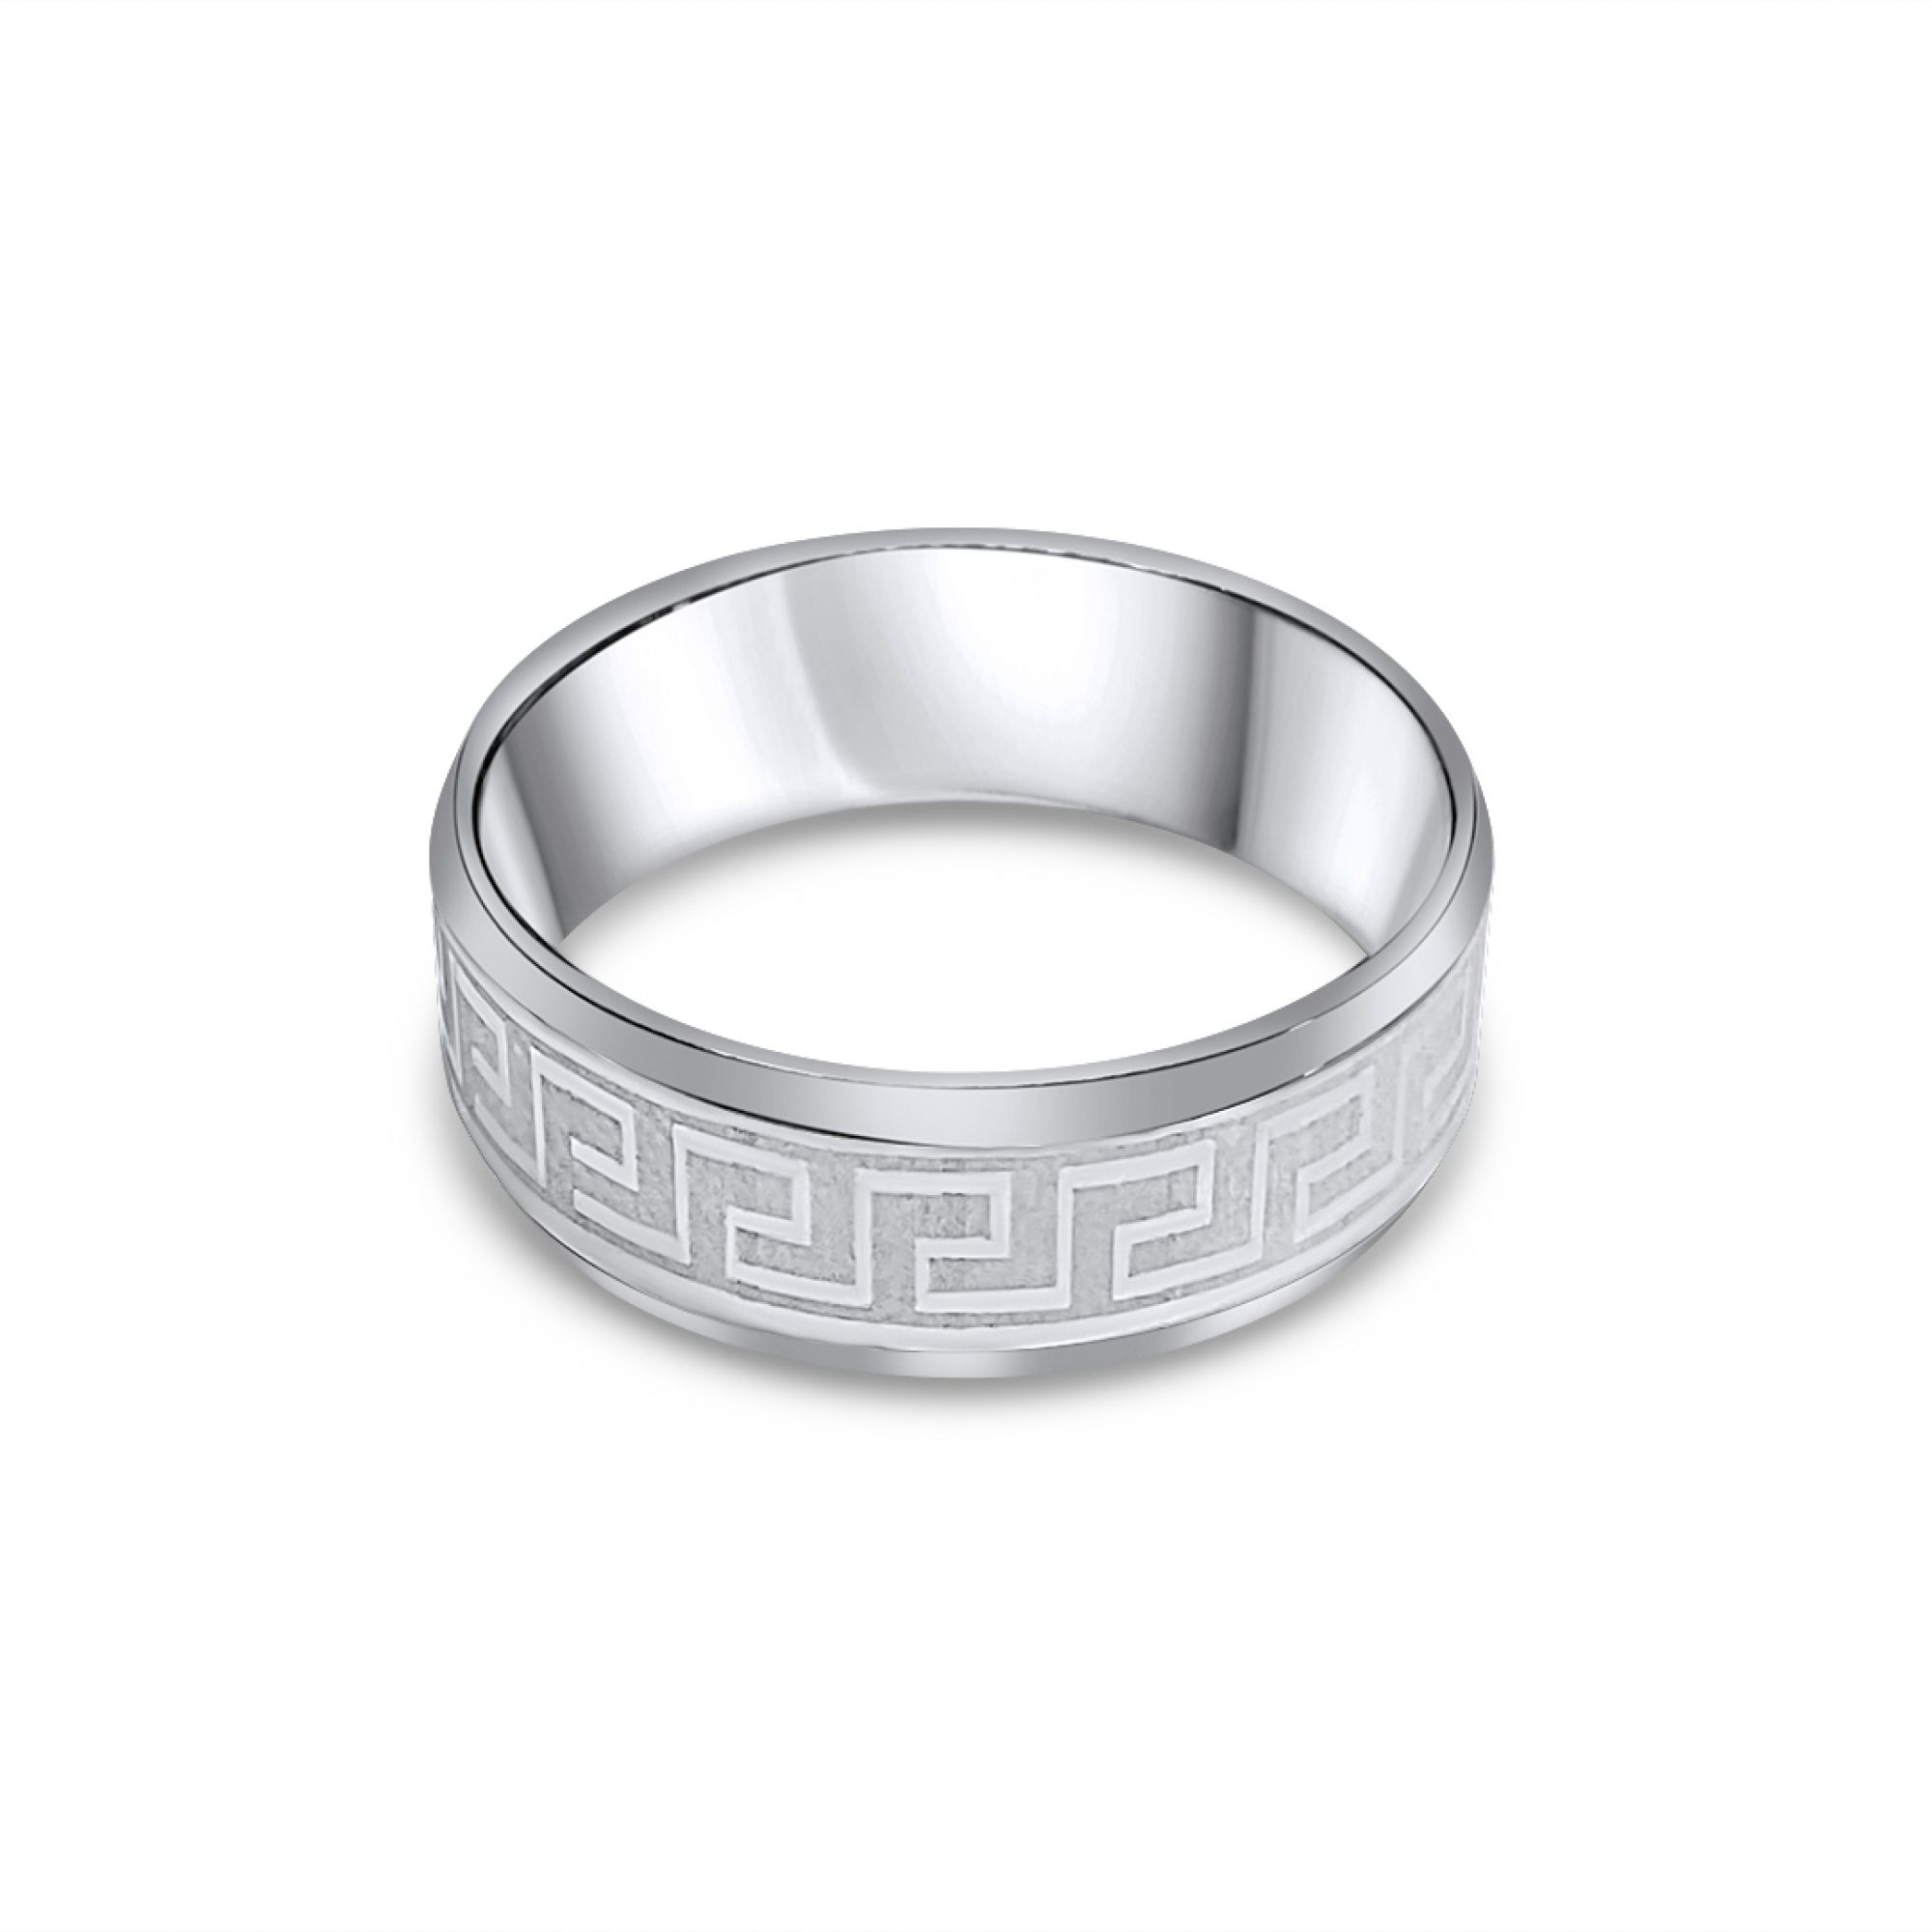 Steel ring with meander